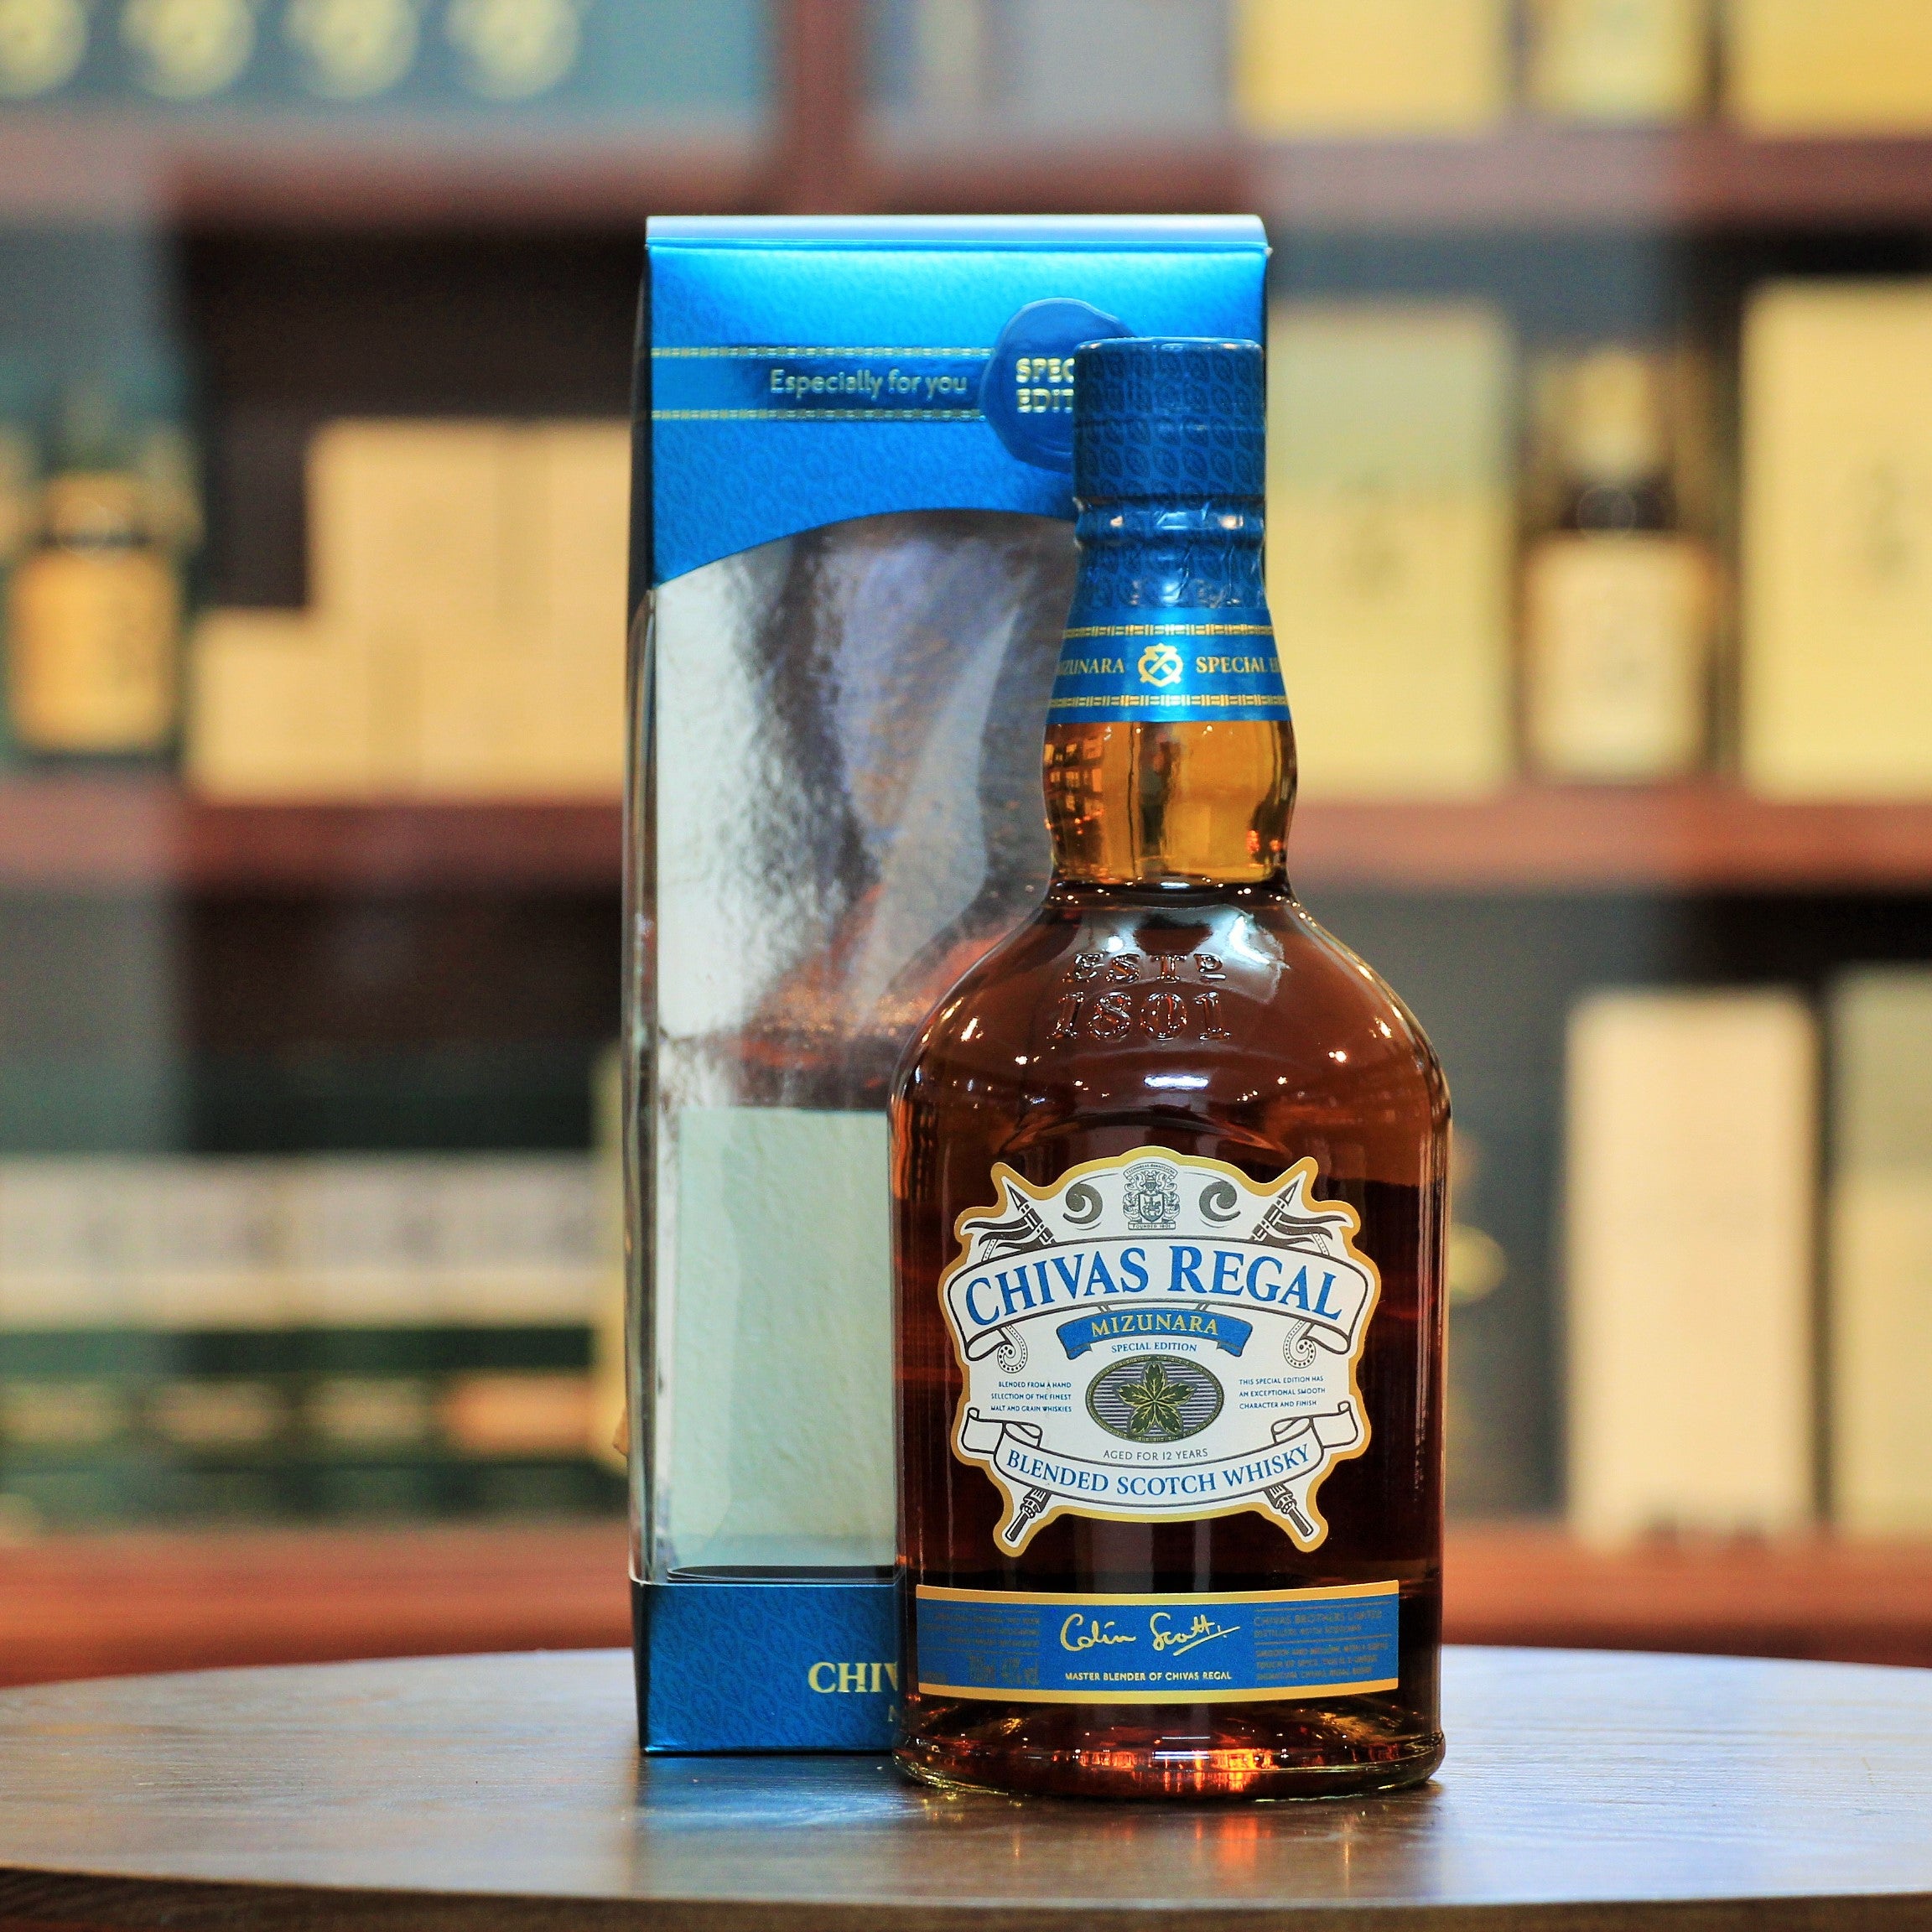 Chivas Mizunara Oak 12 Years Old Japan Edition 2015 Release, A creation of Master Blender Colin Scott, this 12 years old includes a good proportion of Speyside malts, partly finished in Casks made from the rare Mizunara (Japanese Oak). This is the 2015 release. Sweet and creamy, with a hint of fruit and pepper.